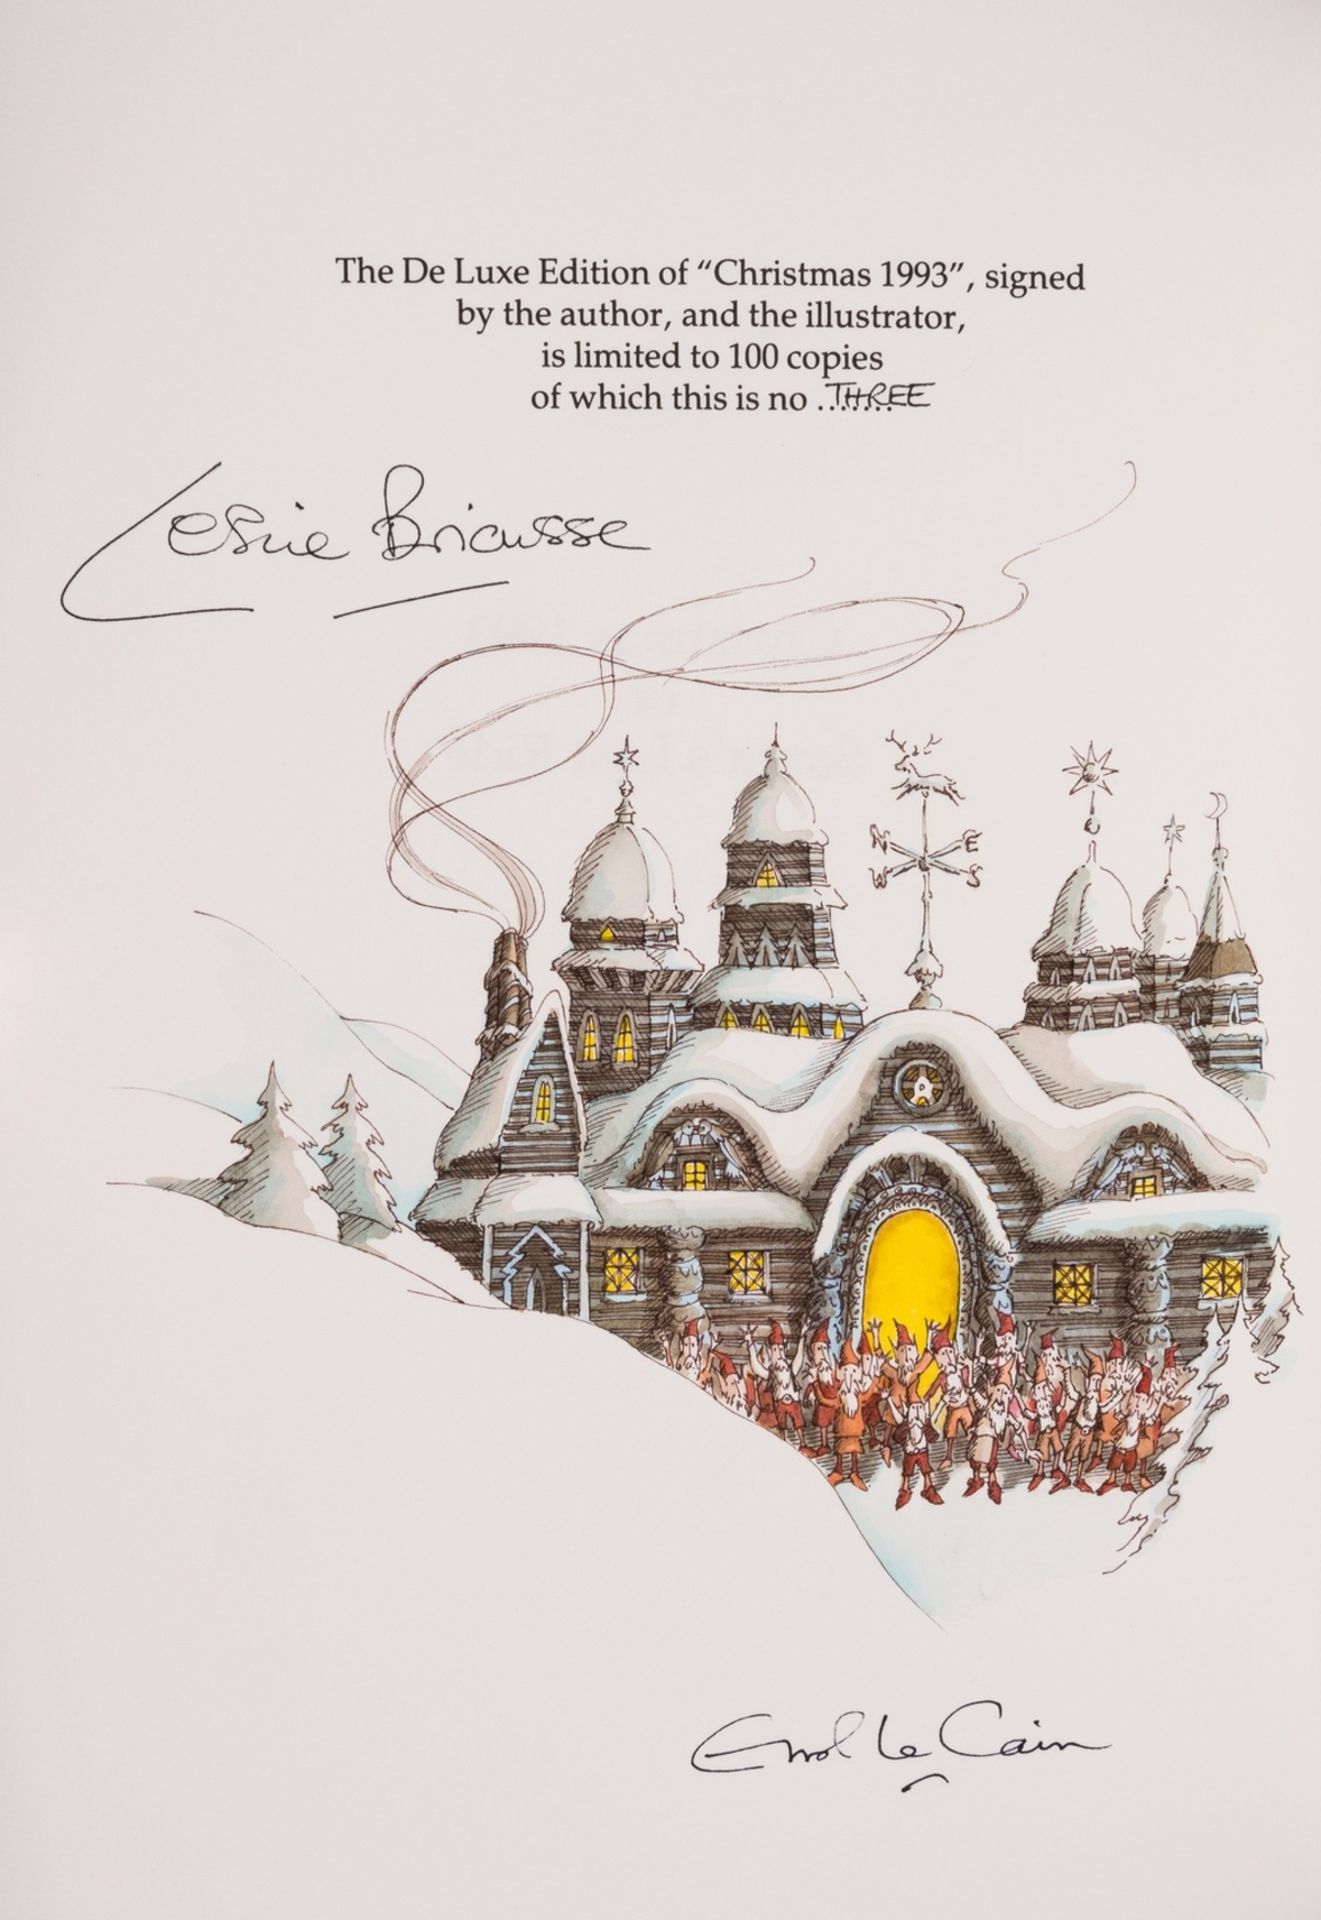 Le Cain (Errol).- Bricusse (Leslie) Christmas 1993 or Santa's Last Ride, number 3 of 10 special …